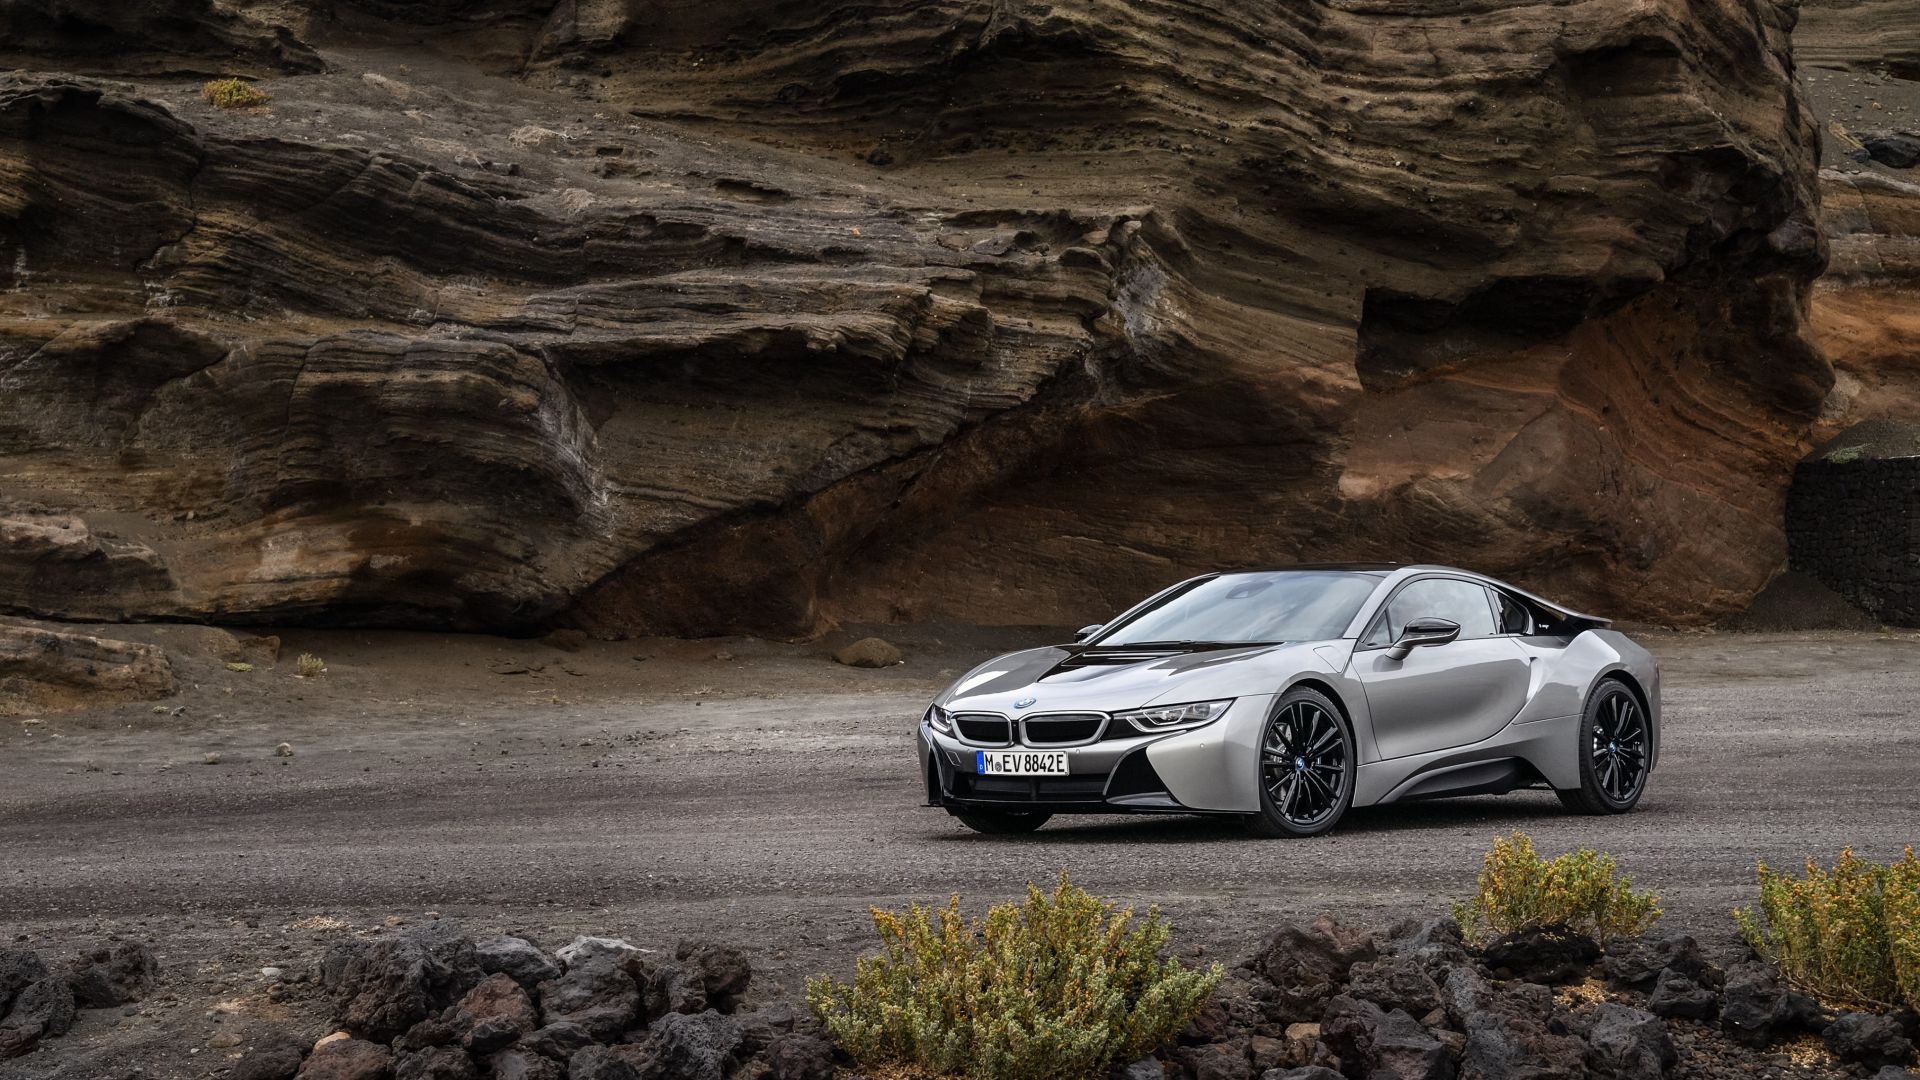 Download Bmw I8 wallpapers for mobile phone free Bmw I8 HD pictures